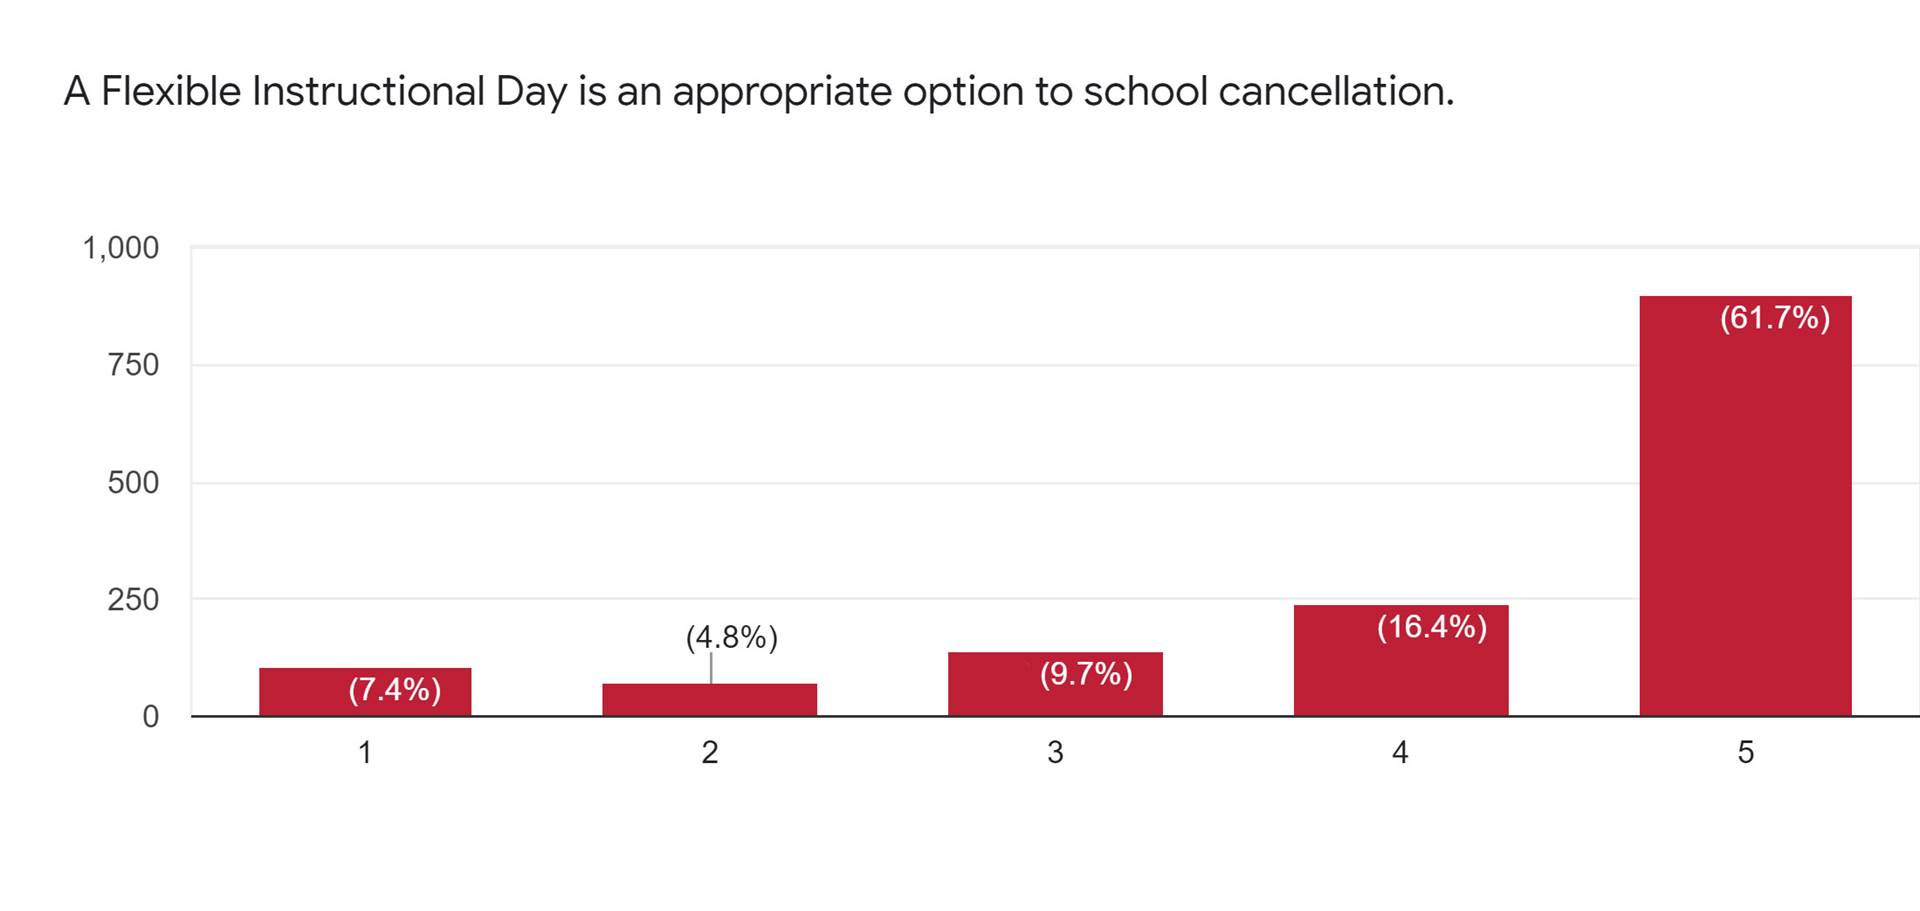 FID Survey Slide 3 - "A Flexible Instructional Day is an appropriate option to school cancellation" 